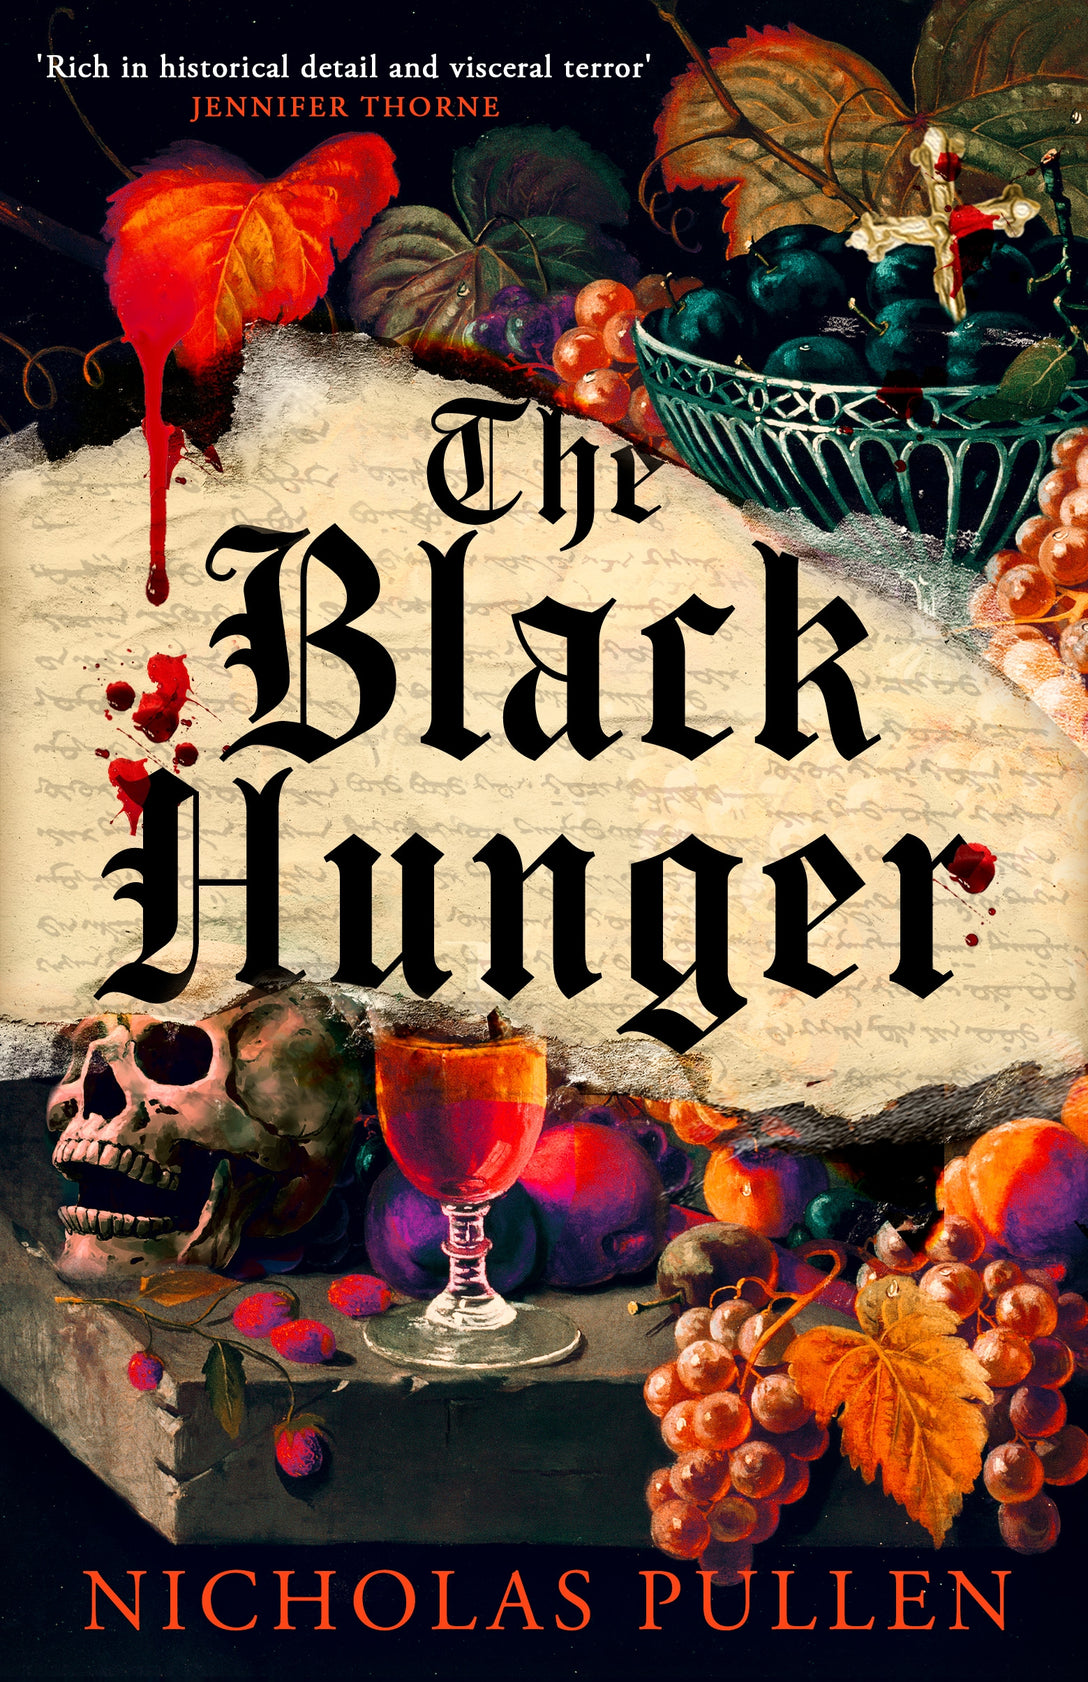 The Black Hunger by Nicholas Pullen